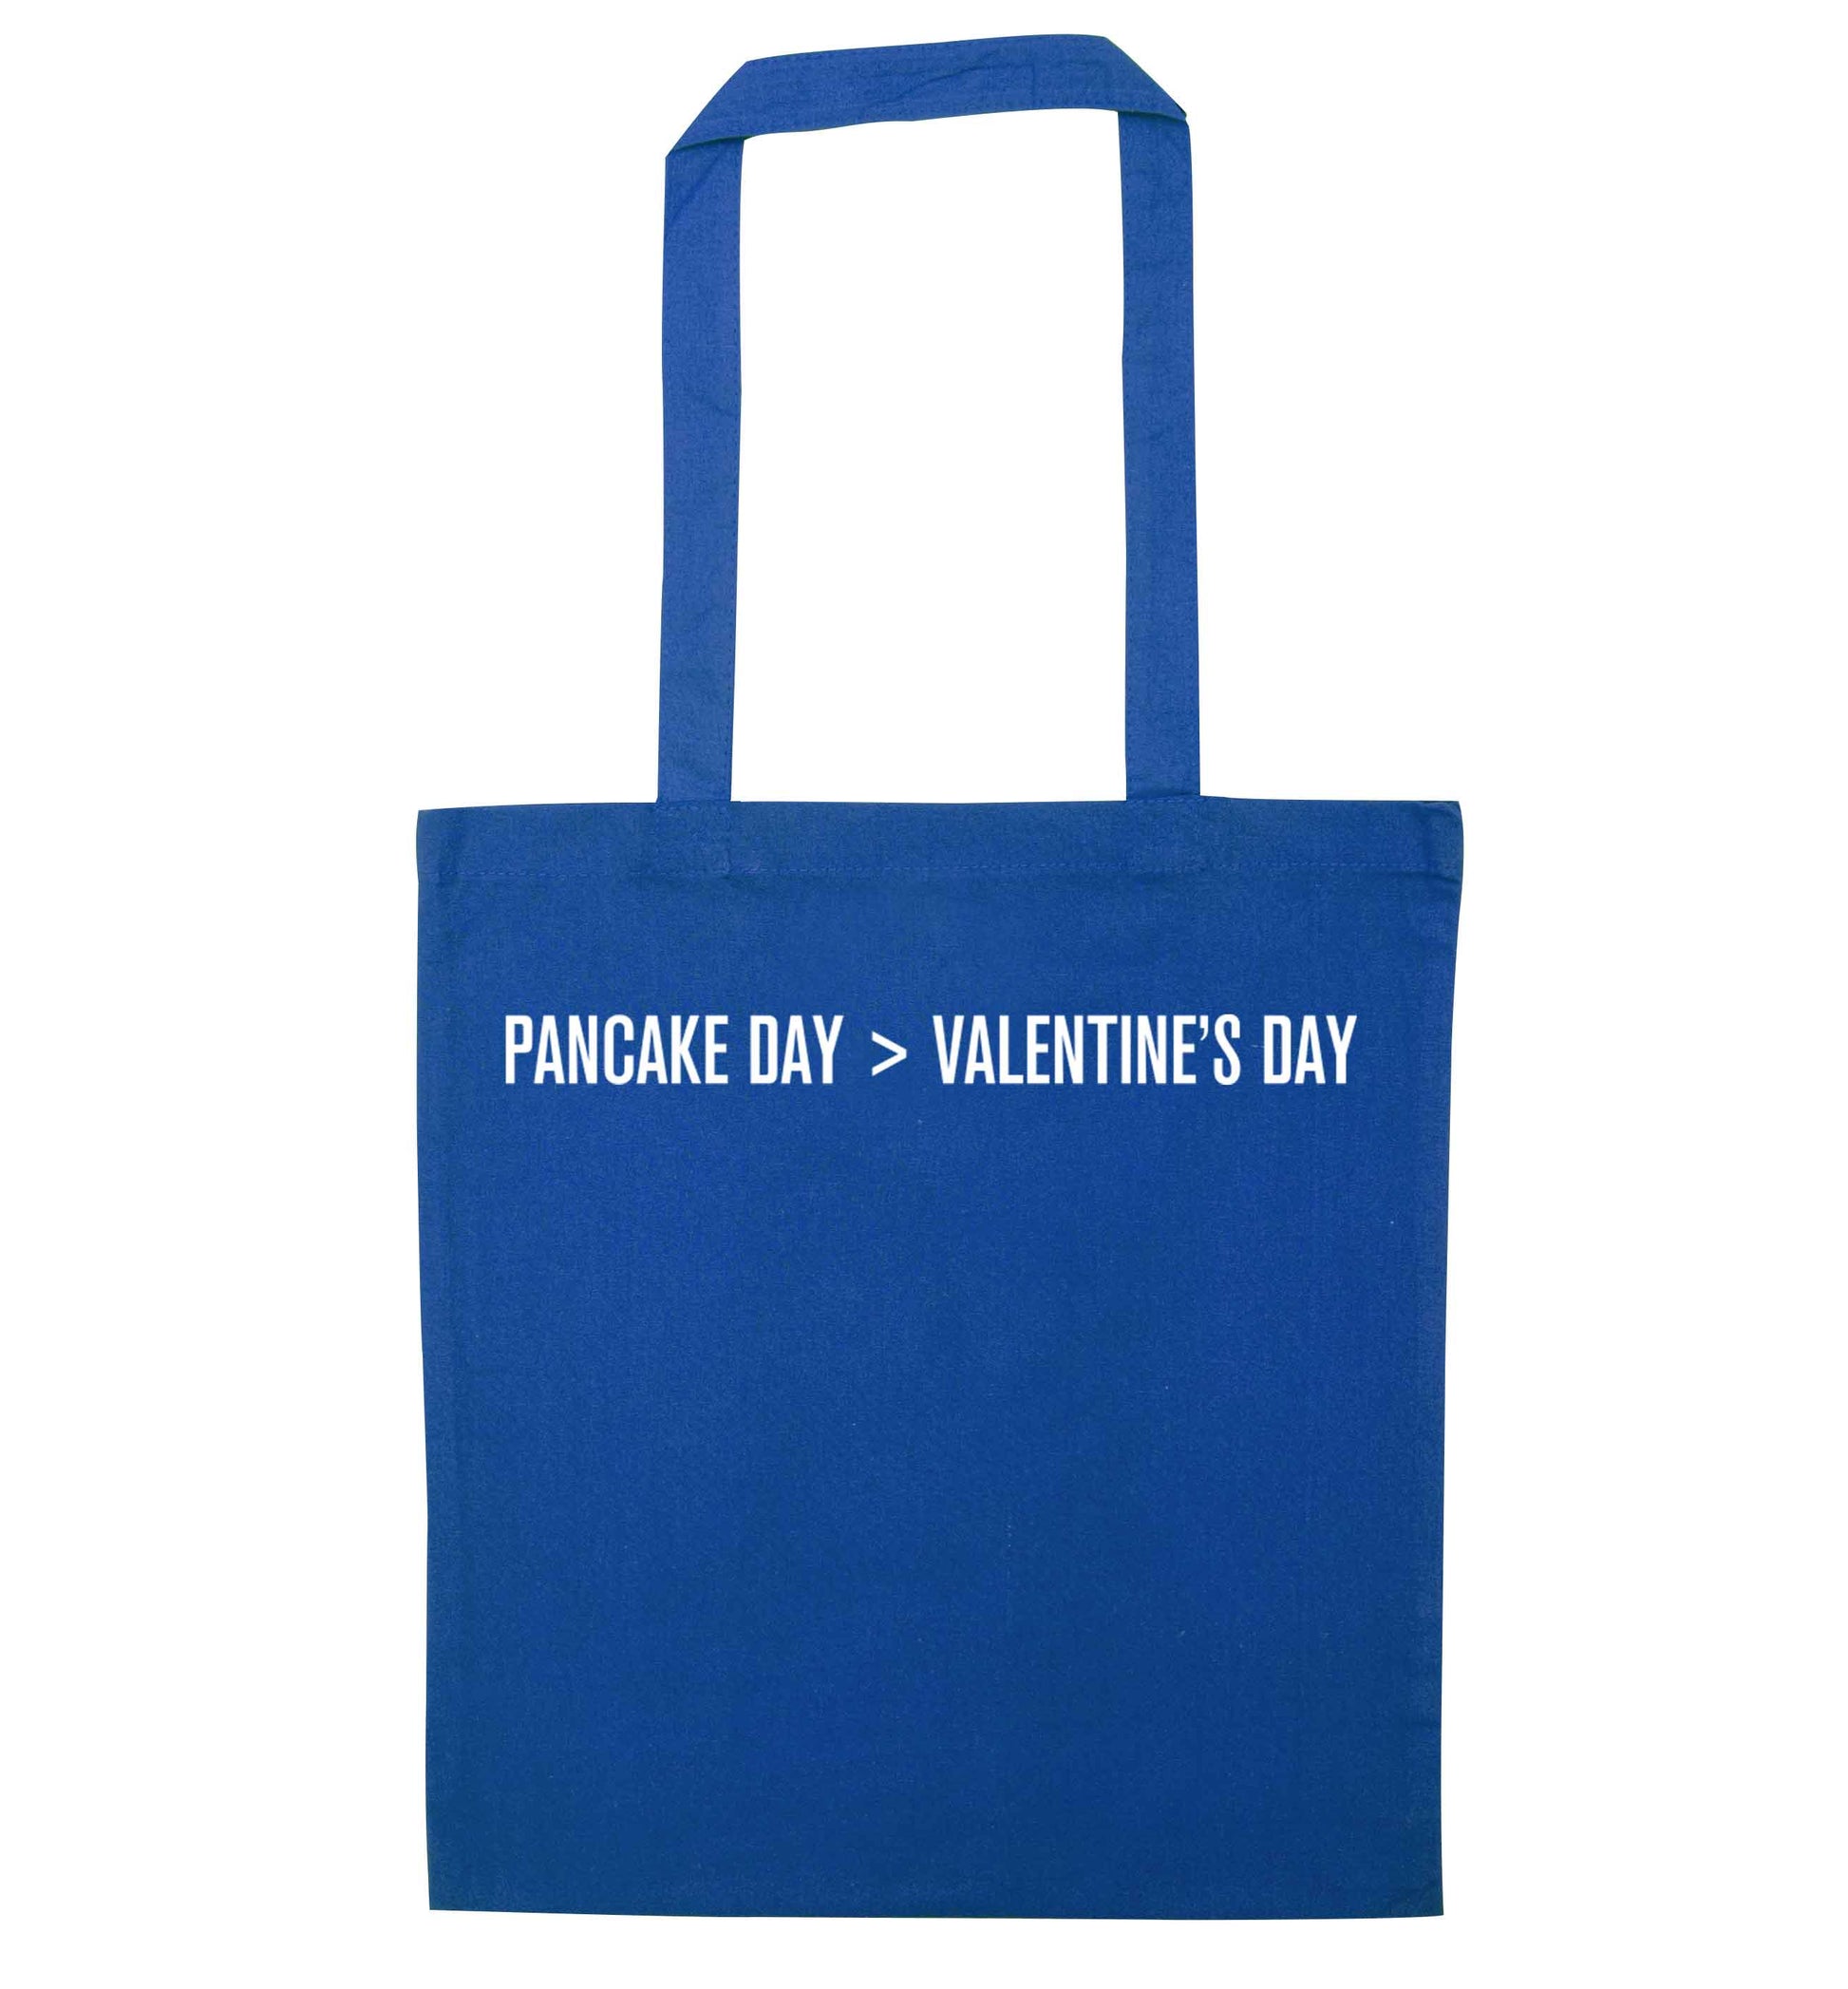 Pancake day > valentines day blue tote bag